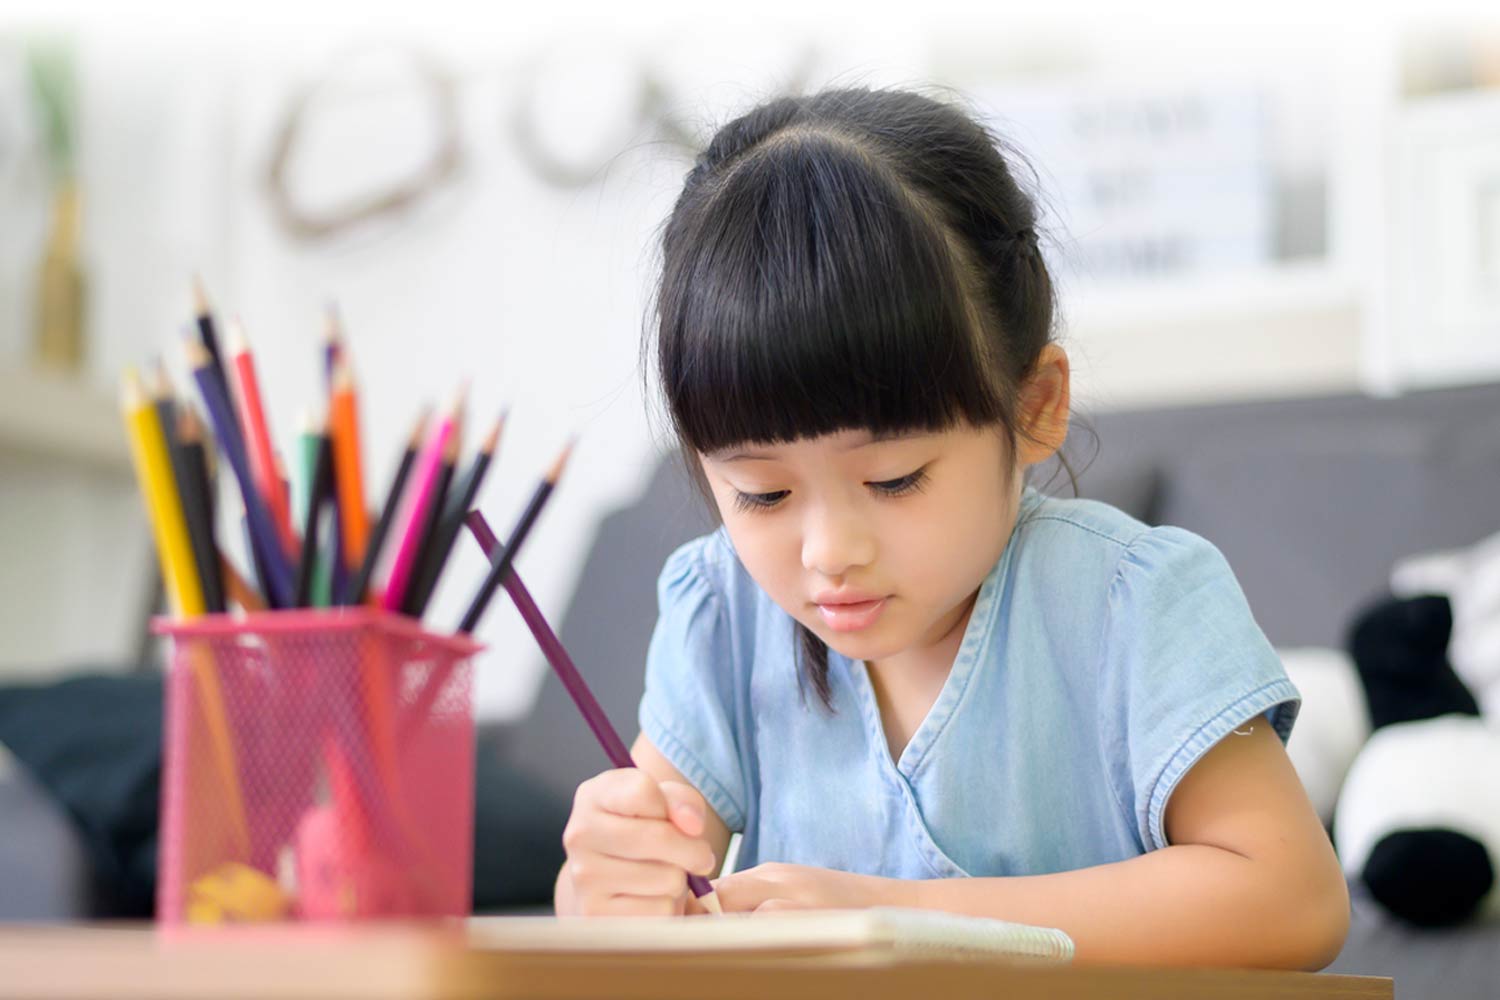 young girl drawing with colored pencils